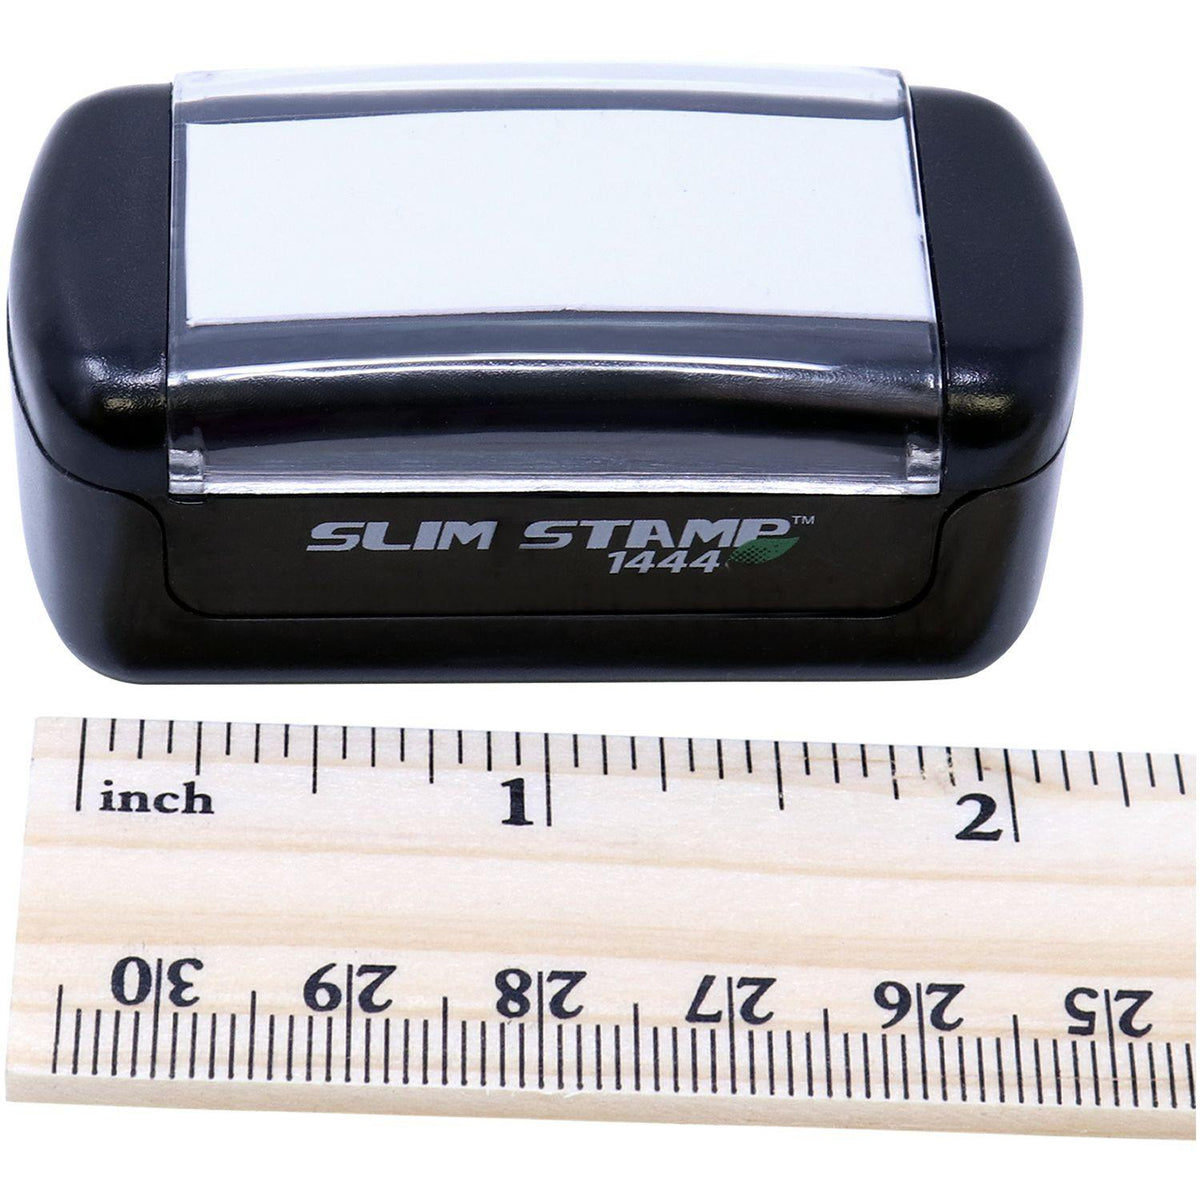 Slim Pre-Inked Bold Allergies Stamp - Engineer Seal Stamps - Brand_Slim, Impression Size_Small, Stamp Type_Pre-Inked Stamp, Type of Use_Medical Office